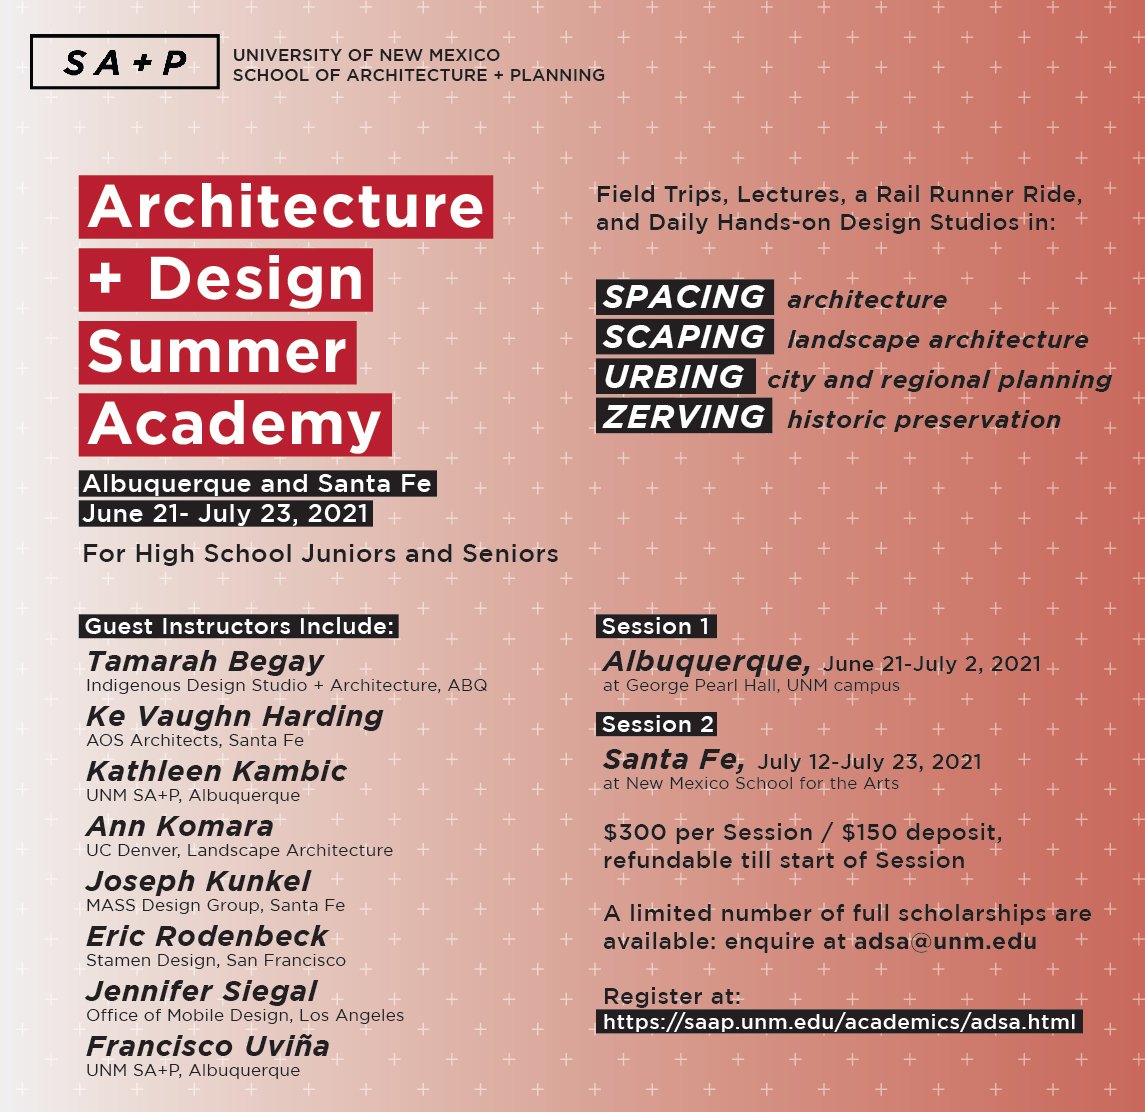 We're launching the Architecture + Design Summer Academy, SA+P’s new program for high school teens, with two-week in-person sessions in Albuquerque (June 21-July 2) and Santa Fe (July 12-23). Learn more and register at saap.unm.edu/academics/adsa…